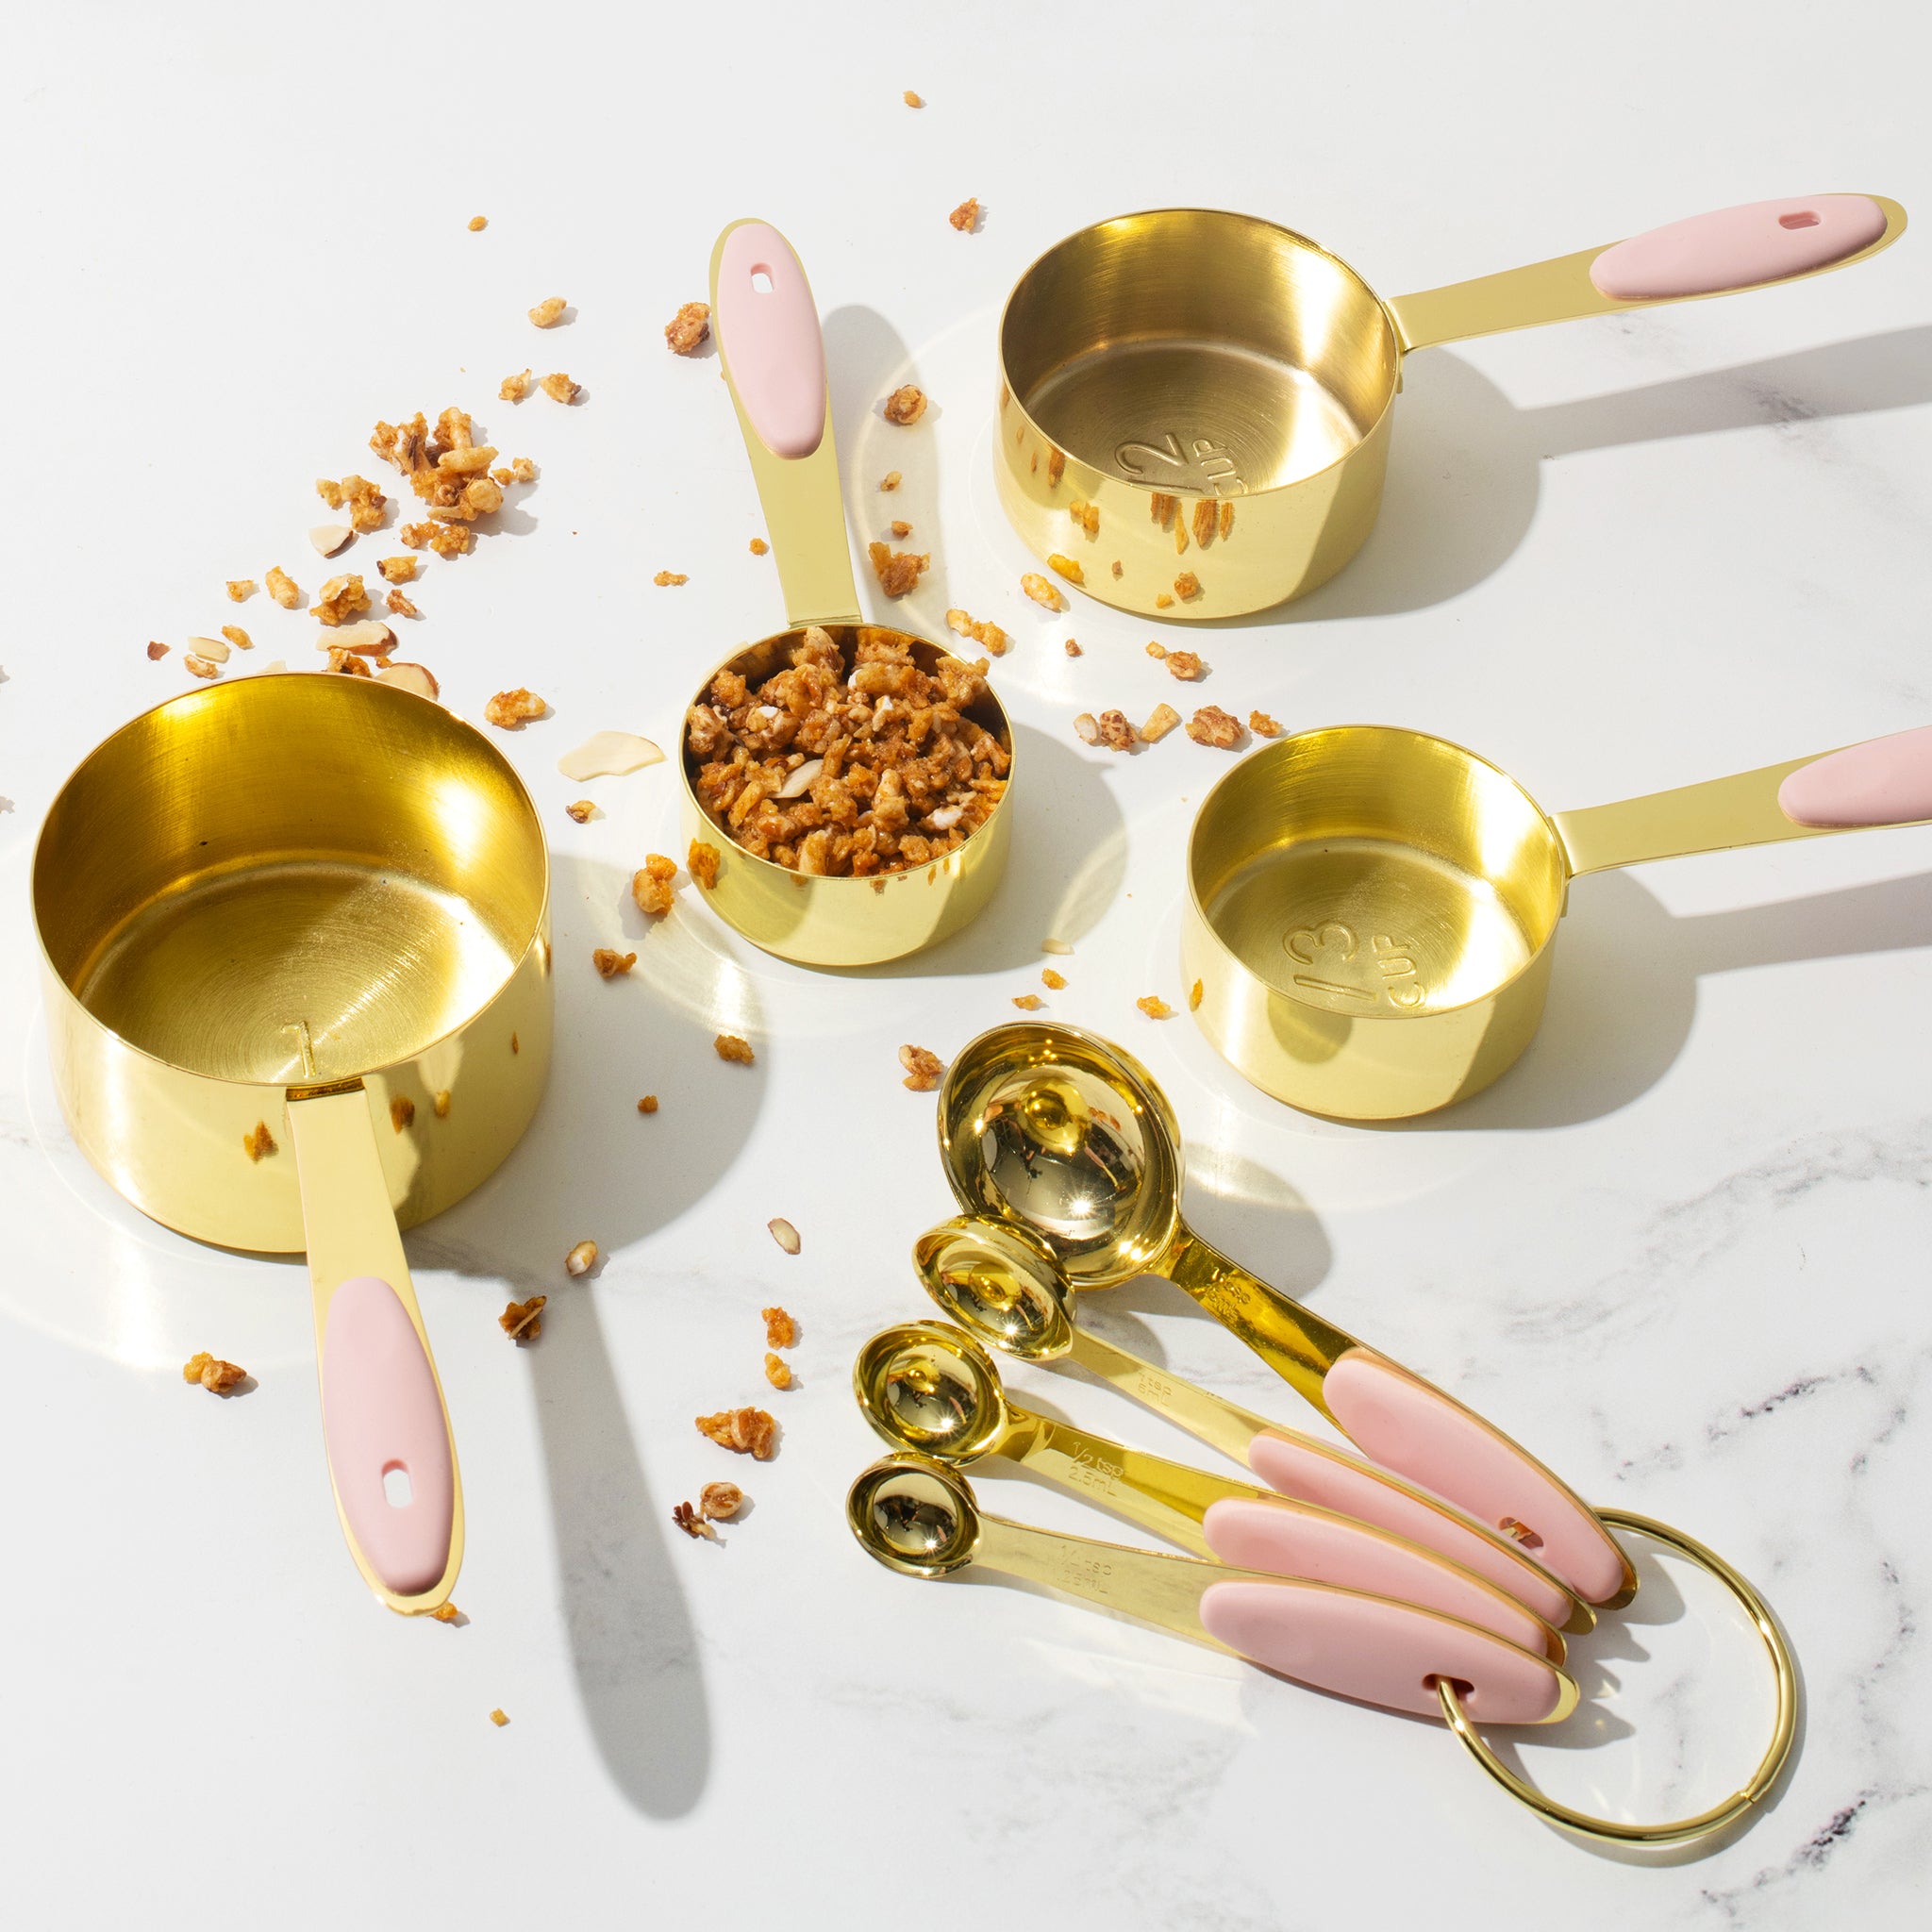 Measuring Cups and Spoons Set of 8 Piece,Gold Measuring Cups with